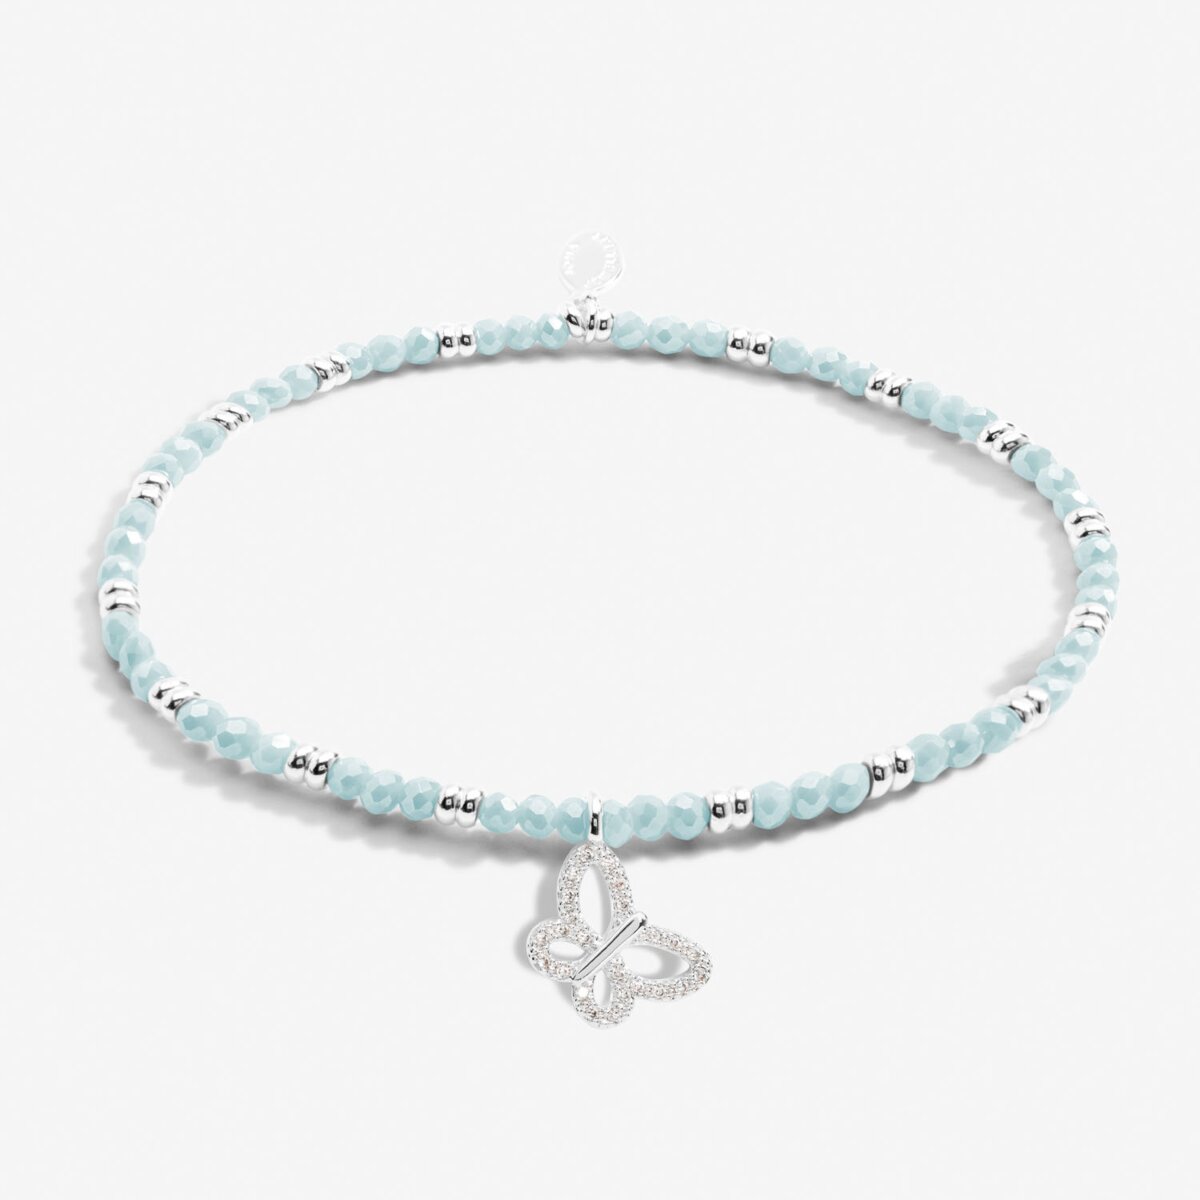 Joma Boho Beads Bracelet in Blue and Silver with Butterfly Charm